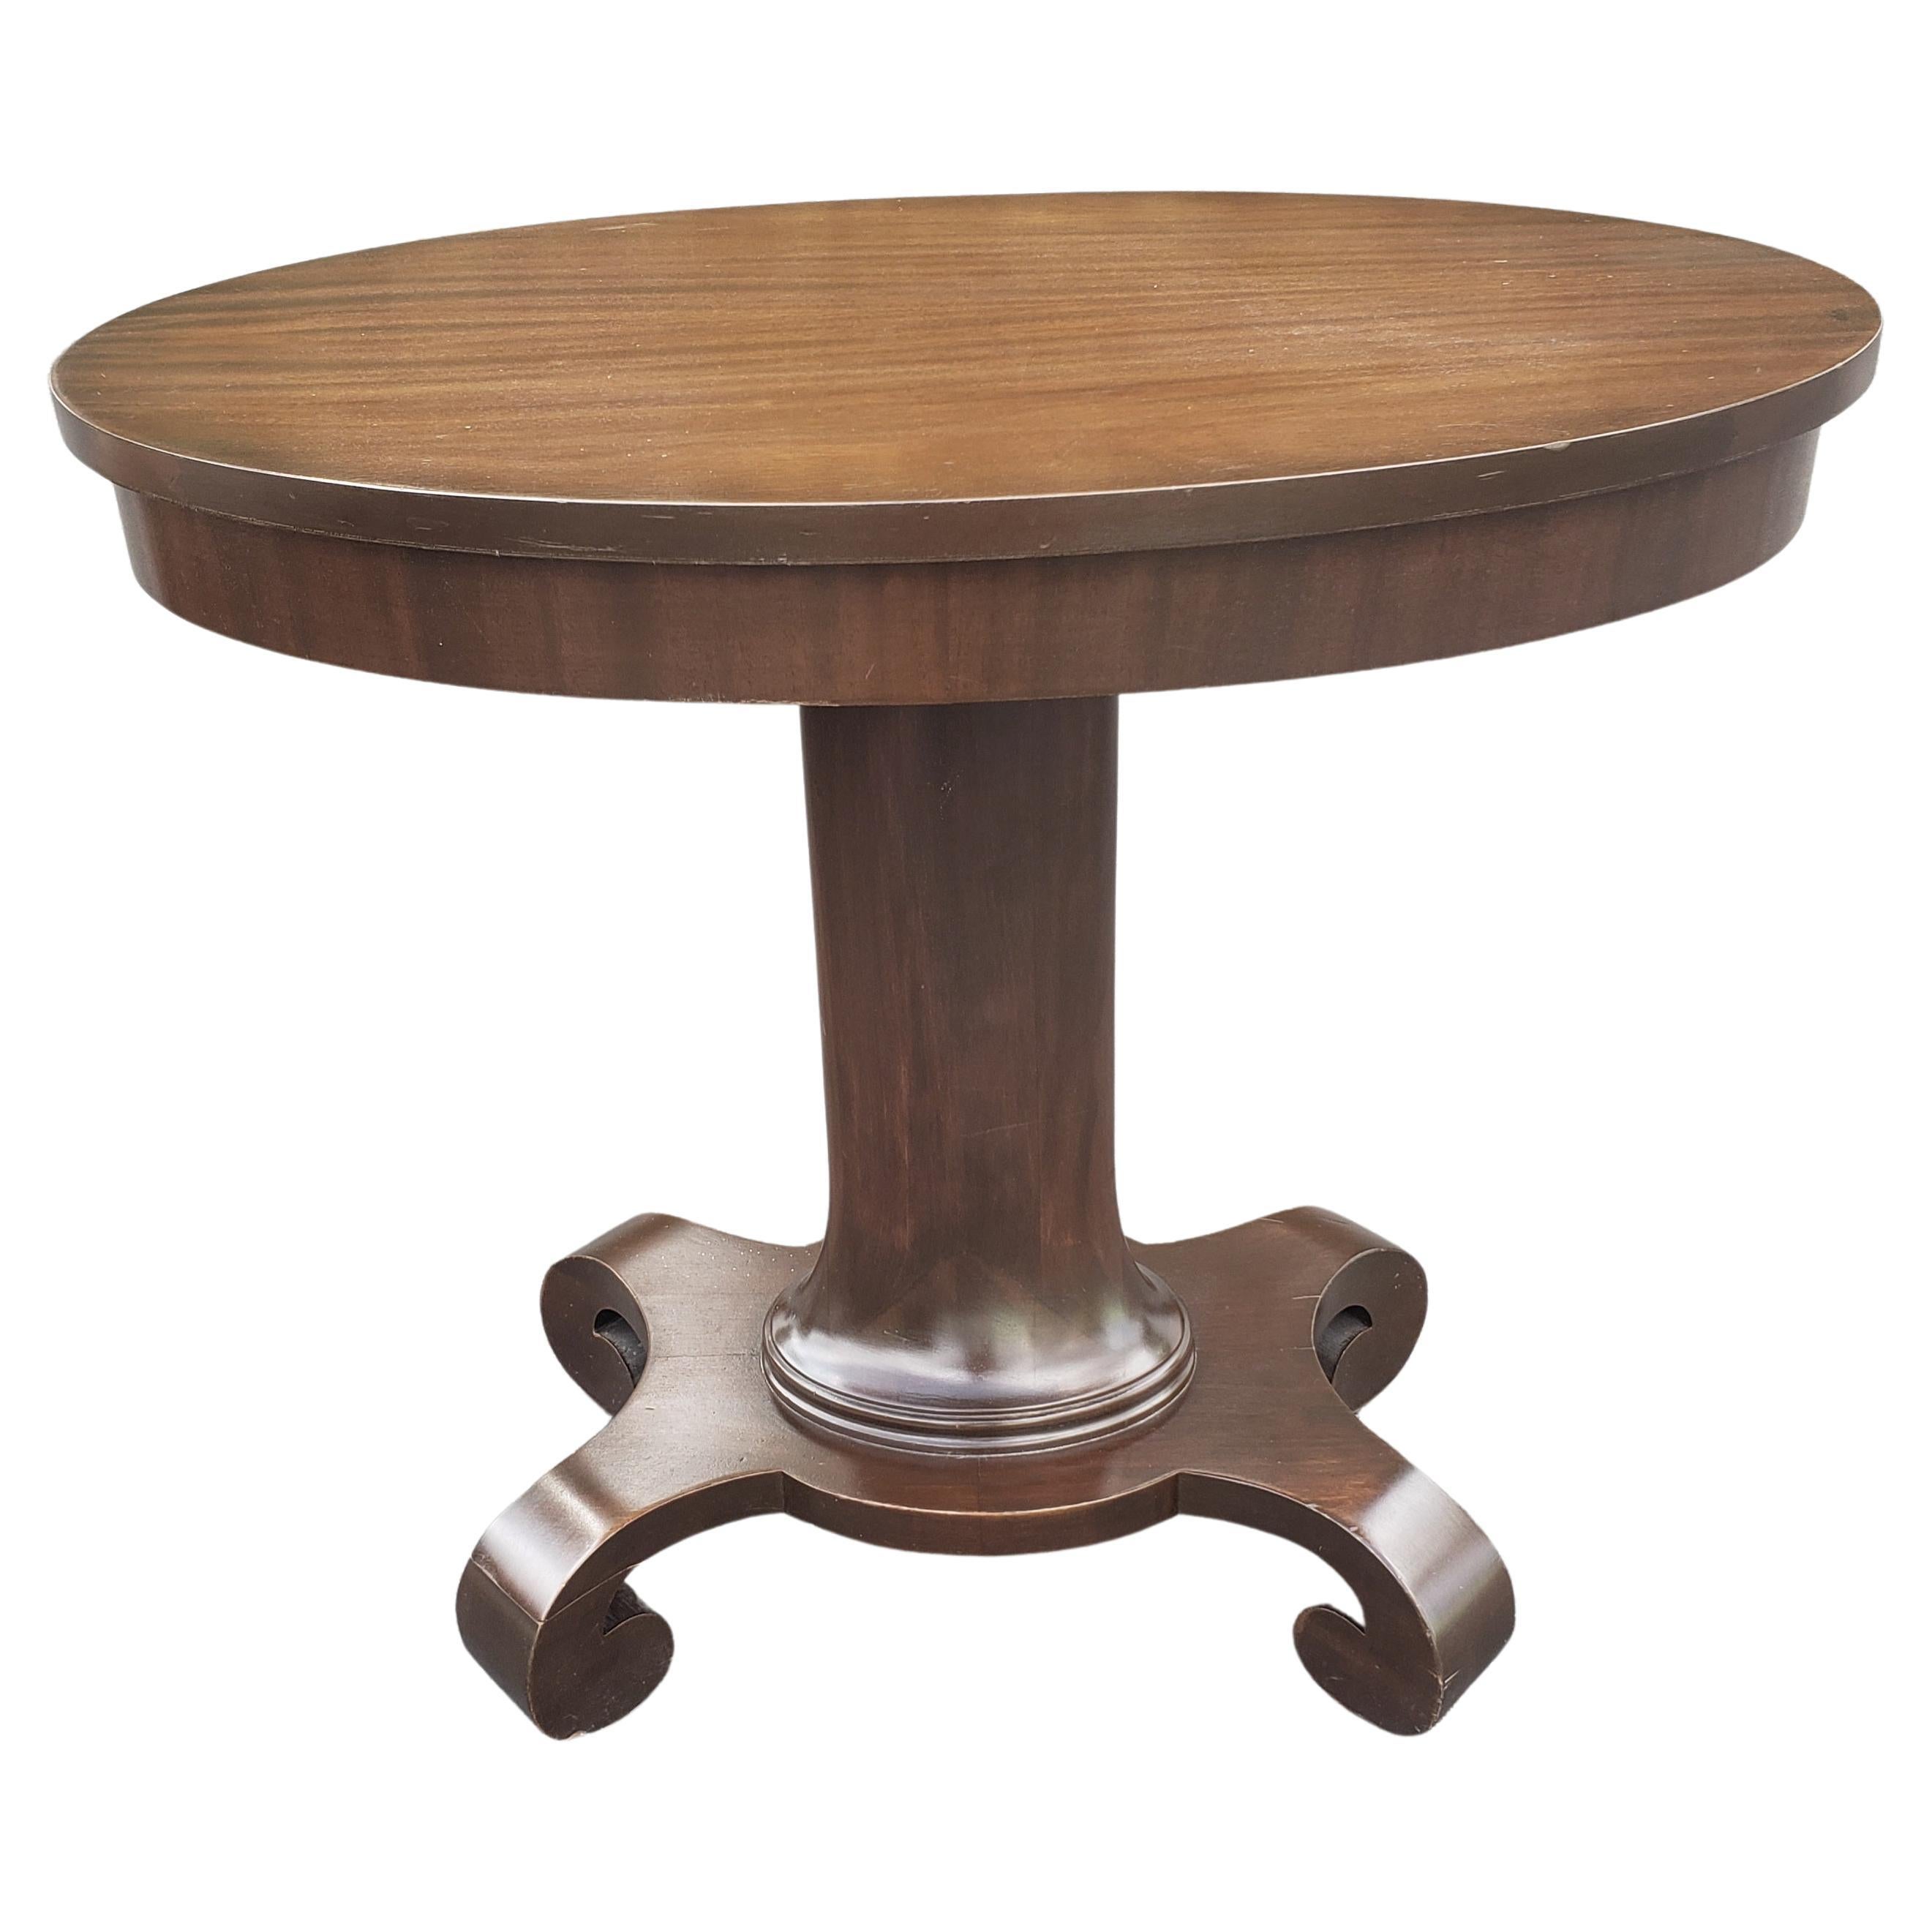 19th Century American Empire Refinished Oval Pedestal Mahogany Side Table 